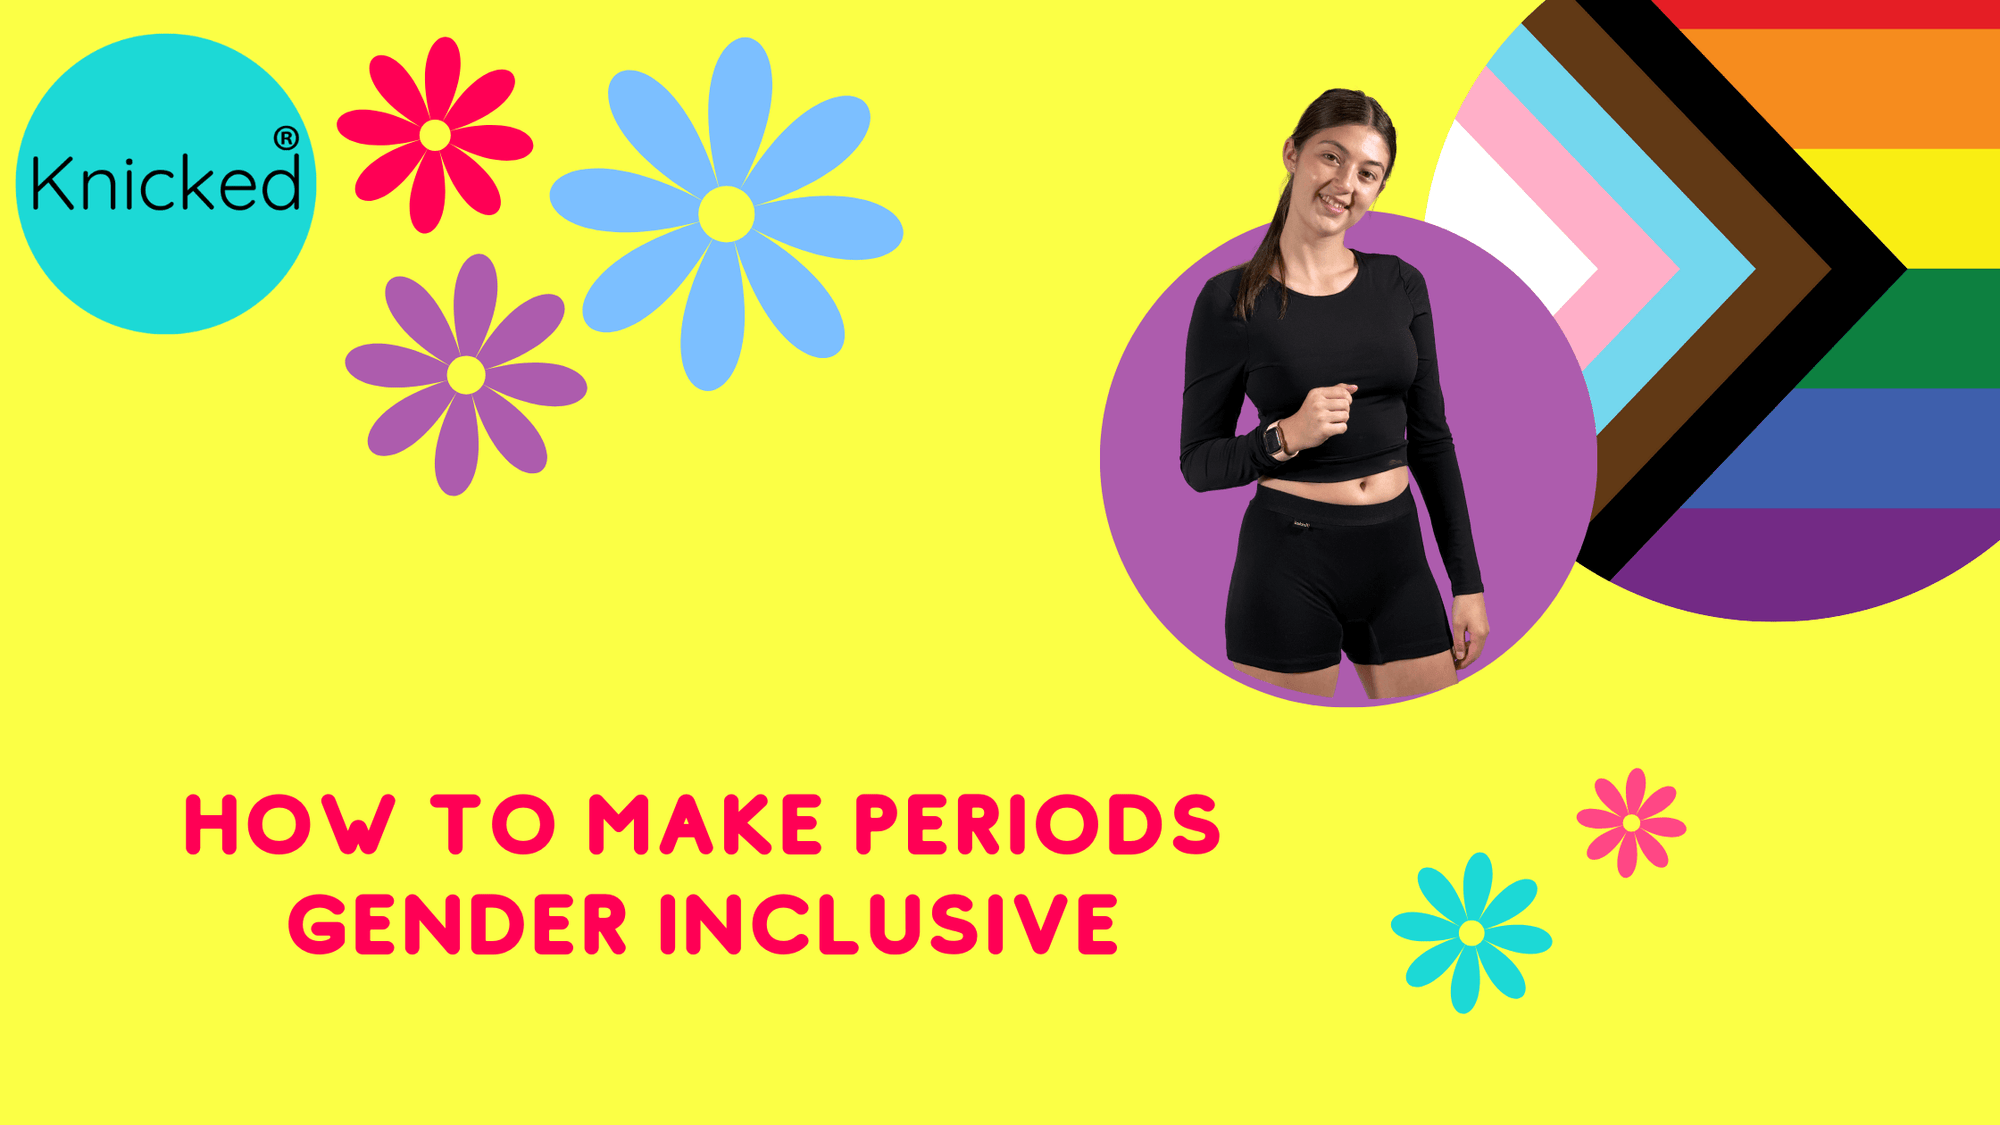 How to Make Periods Gender Inclusive